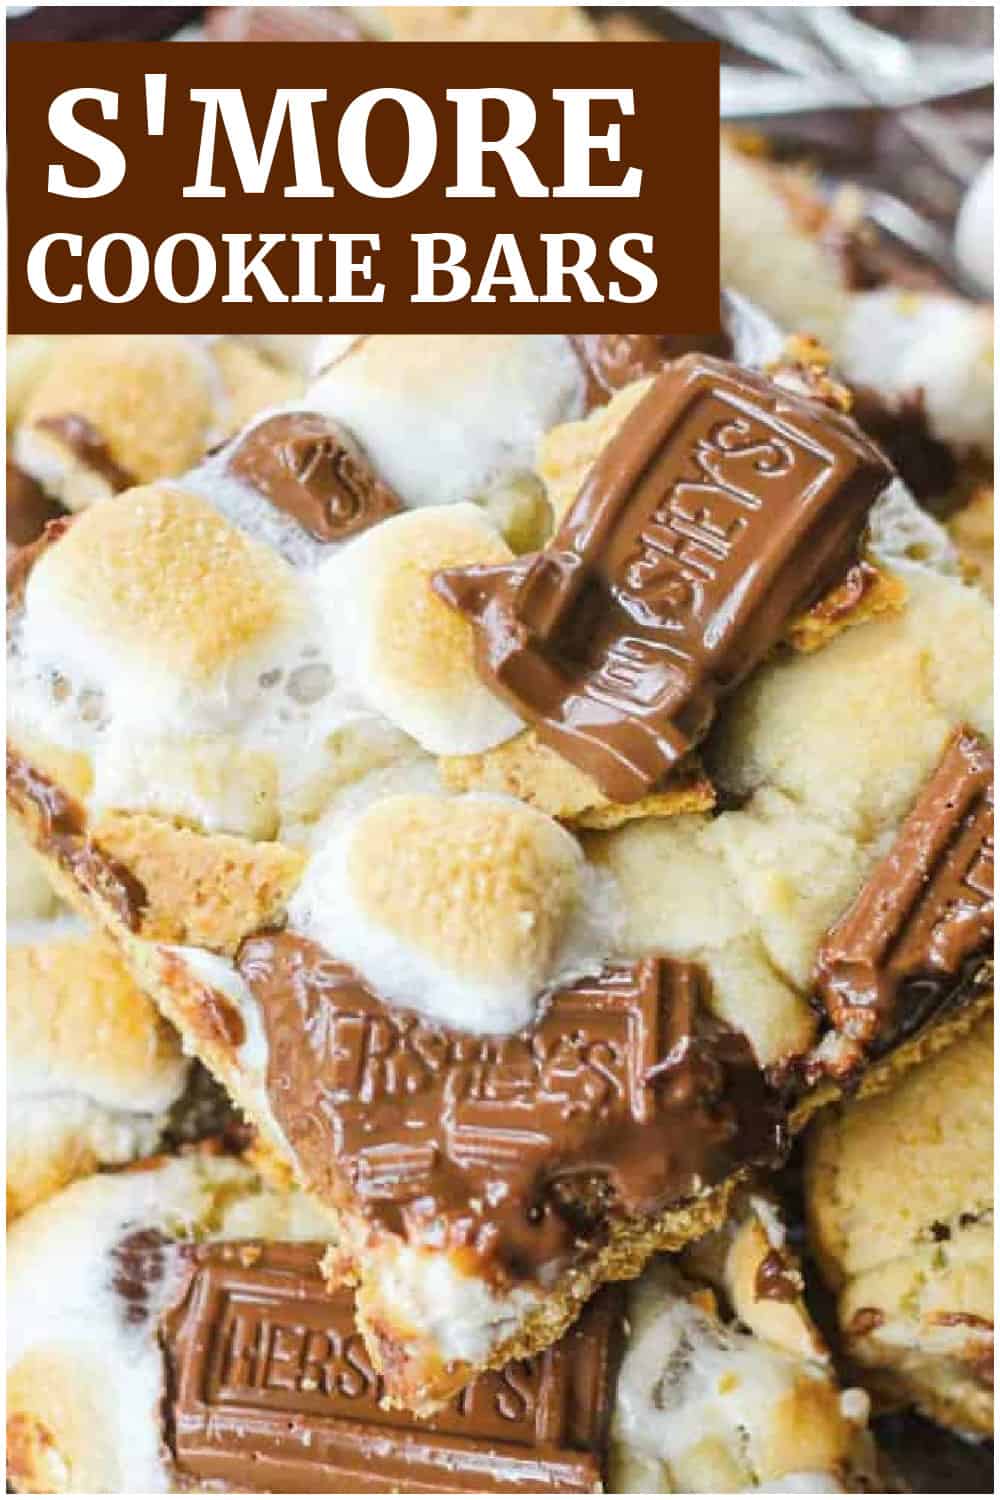 If you love melty marshmallow, chocolate & graham crackers in bar form, this easy recipe for fun S'more Cookie Bars is the best family fave!